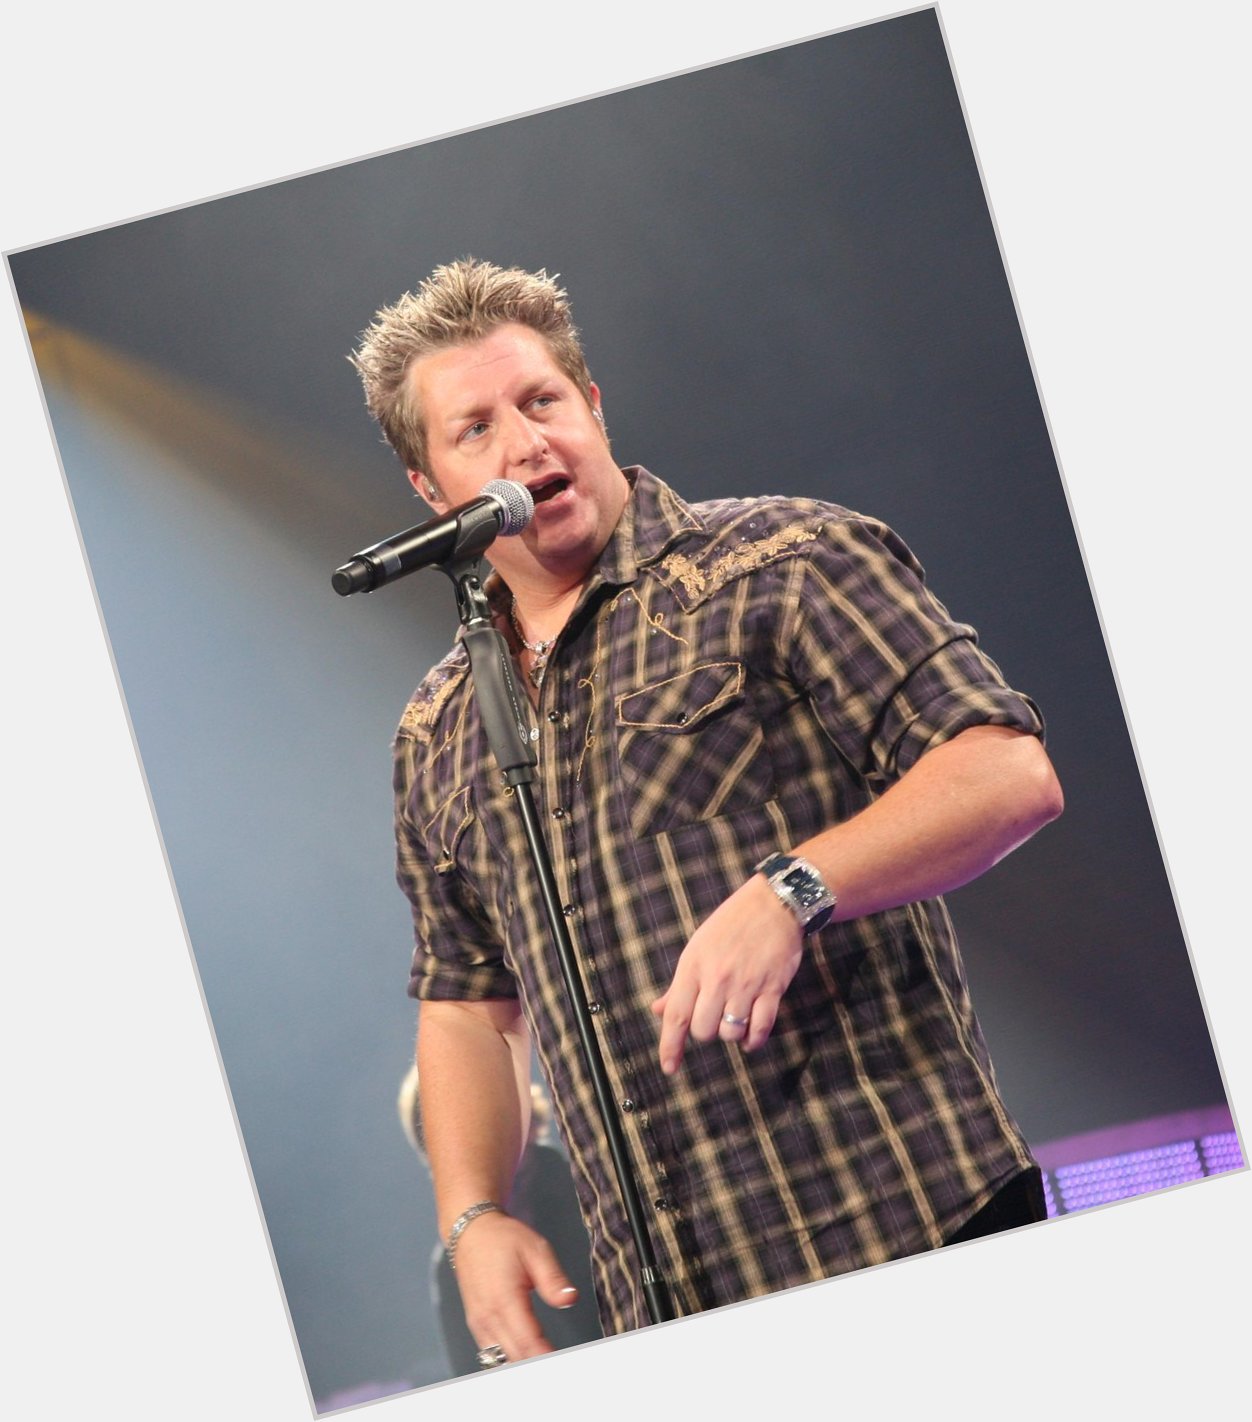 Wishing a Happy Birthday to Gary Levox of We hope to see you at again soon! 